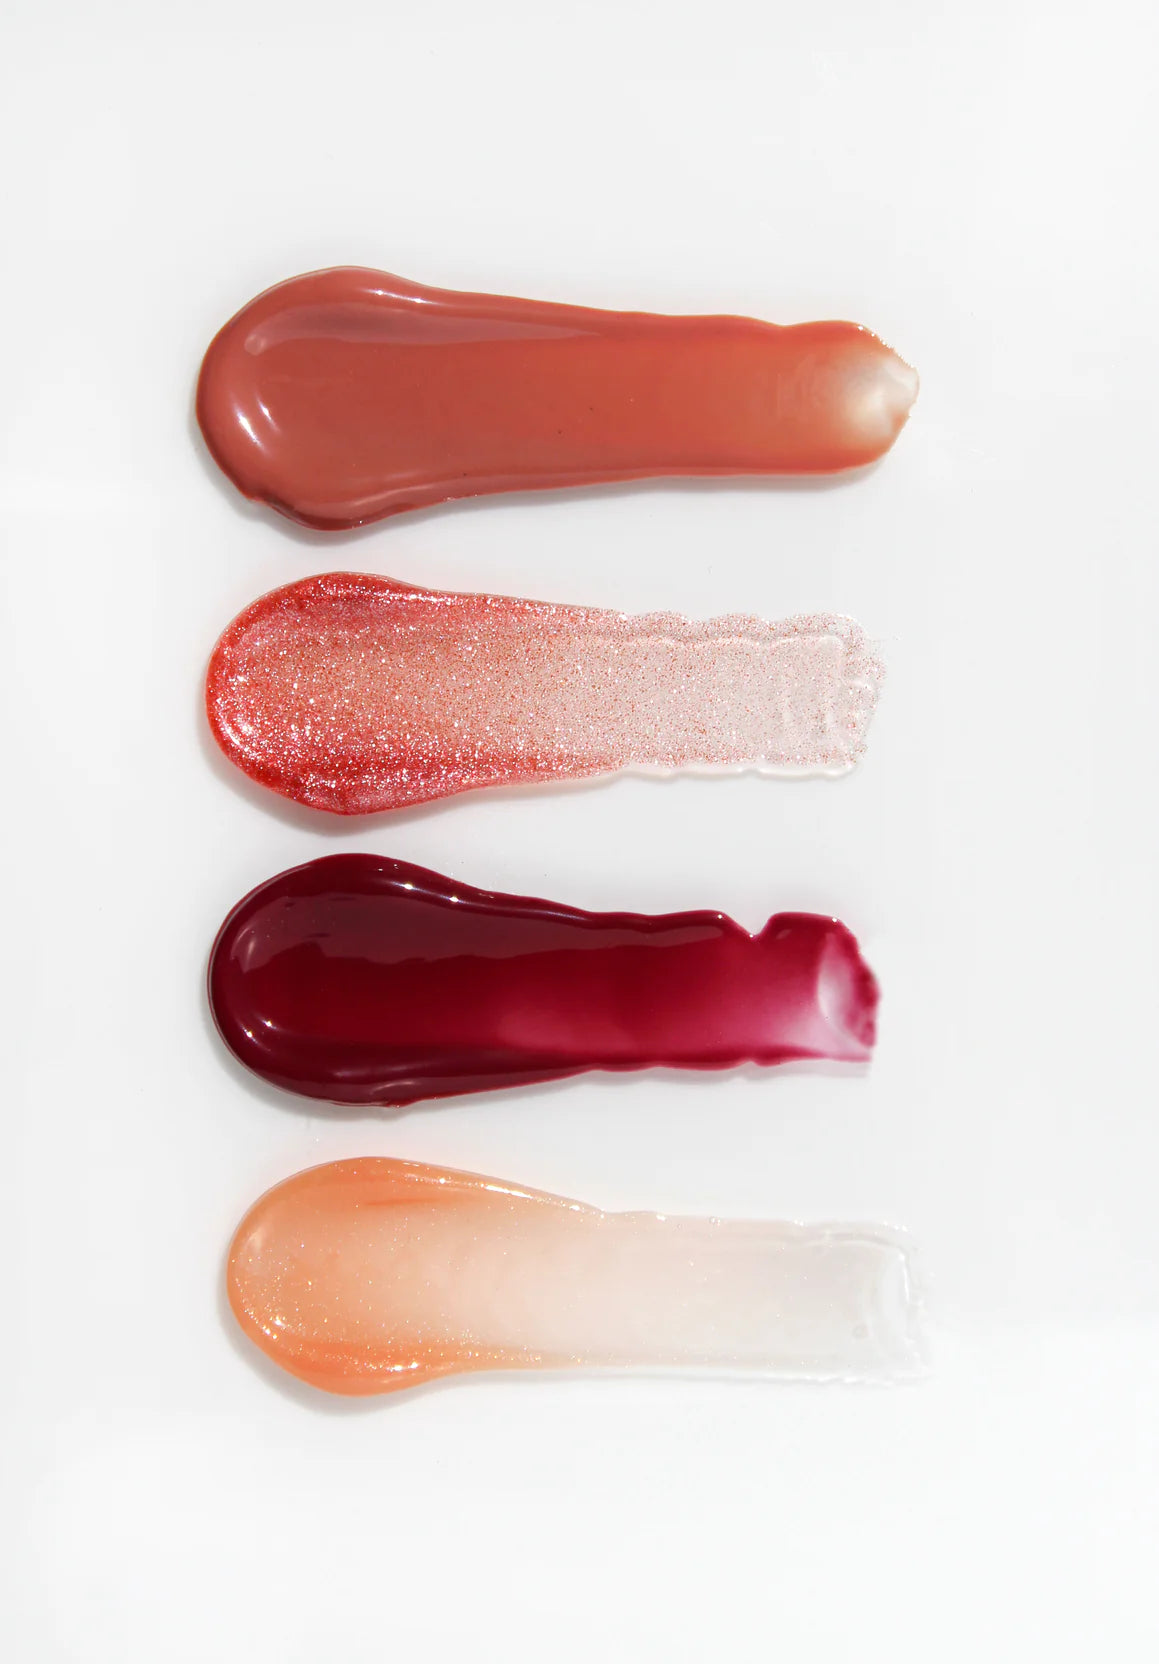 Saint Jane Beauty - Limited Edition! Lip Oil Collection